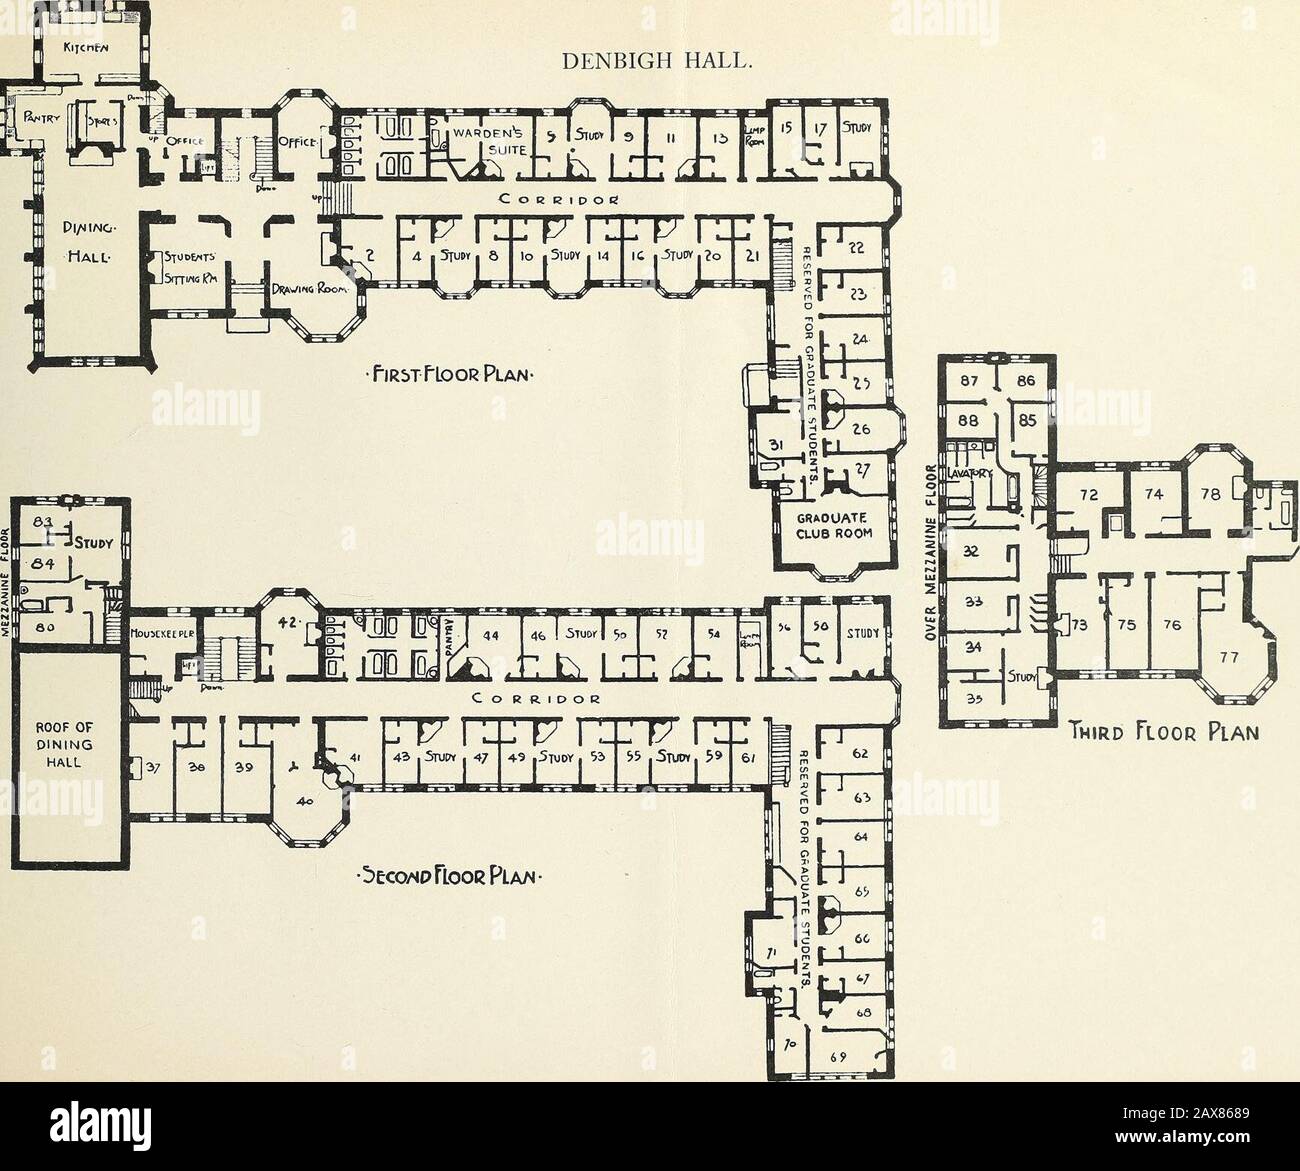 Academic buildings and halls of residence, plans and descriptions . l„ pf-ti—iA; DENBIGH HALL. Bents of Rooms. $75 a year, the single rooms 22, 23, 24, 25, 26, 27, 31, 62, 63, 64, 65, 66, 67, 68,69, 70, and 71, reserved for graduate students. $100 a year the single rooms 13, 21, 54, 61, 72, 80, 85, 86, 87, 88. $125 a year, the single rooms 32, 33, 76. $150 a year, the single rooms 11, 38, 41, 44, 52, 74. $175 a year, the single rooms 2, 39, and 75, and half of the set of three rooms46-50. $200 a year, the single rooms 37, 73, 77, and 78, and half of any one of thesets of three rooms 5-9, 43-47 Stock Photo